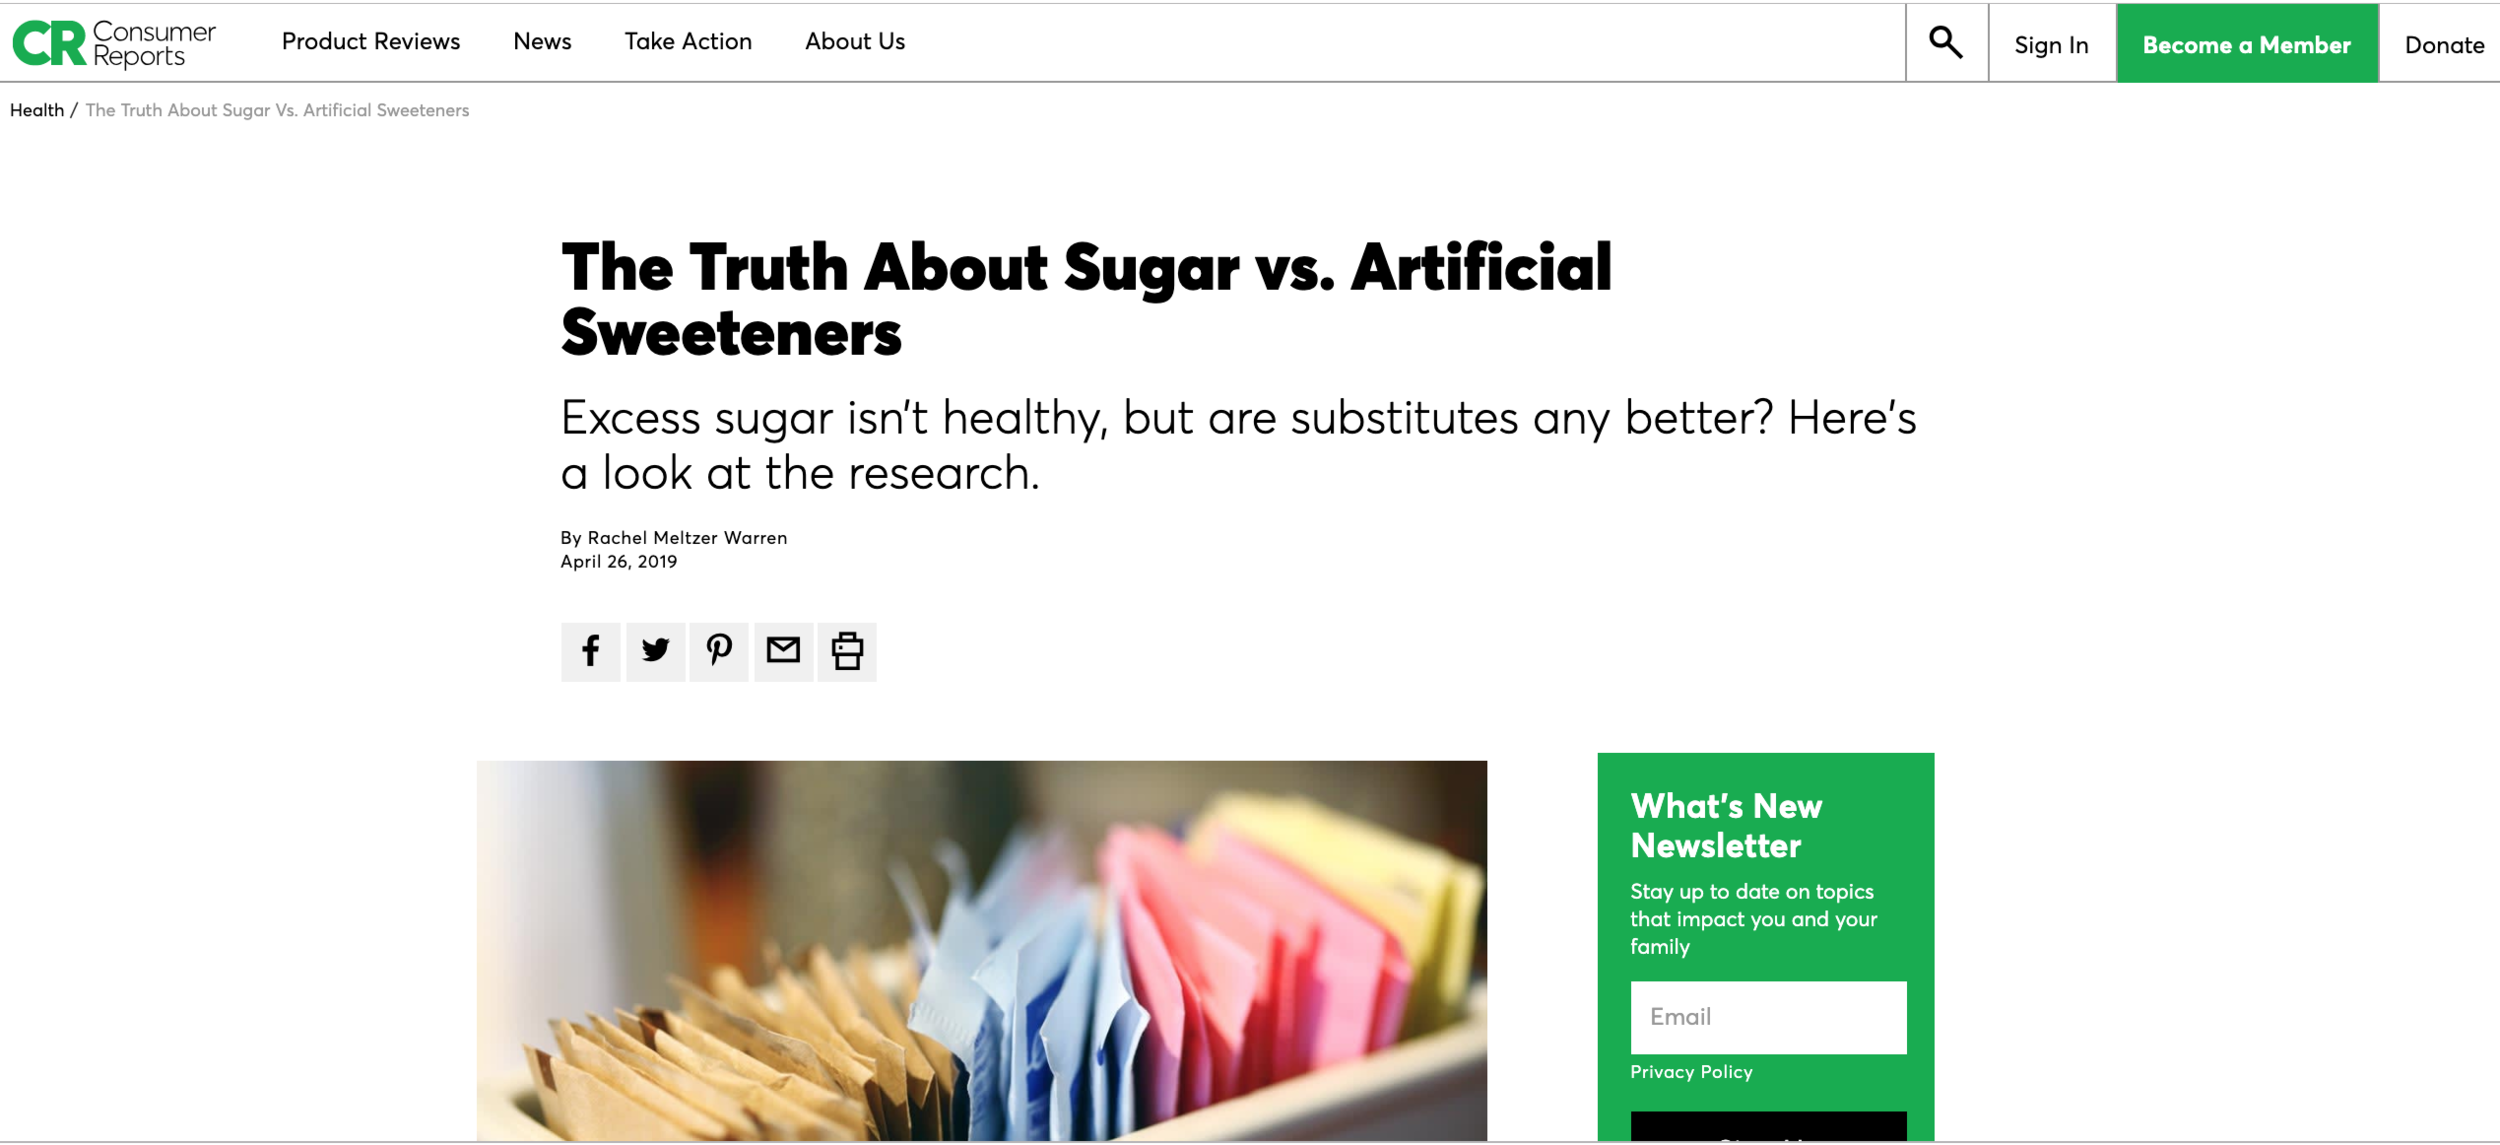 The Truth About Sugar vs. Artificial Sweeteners